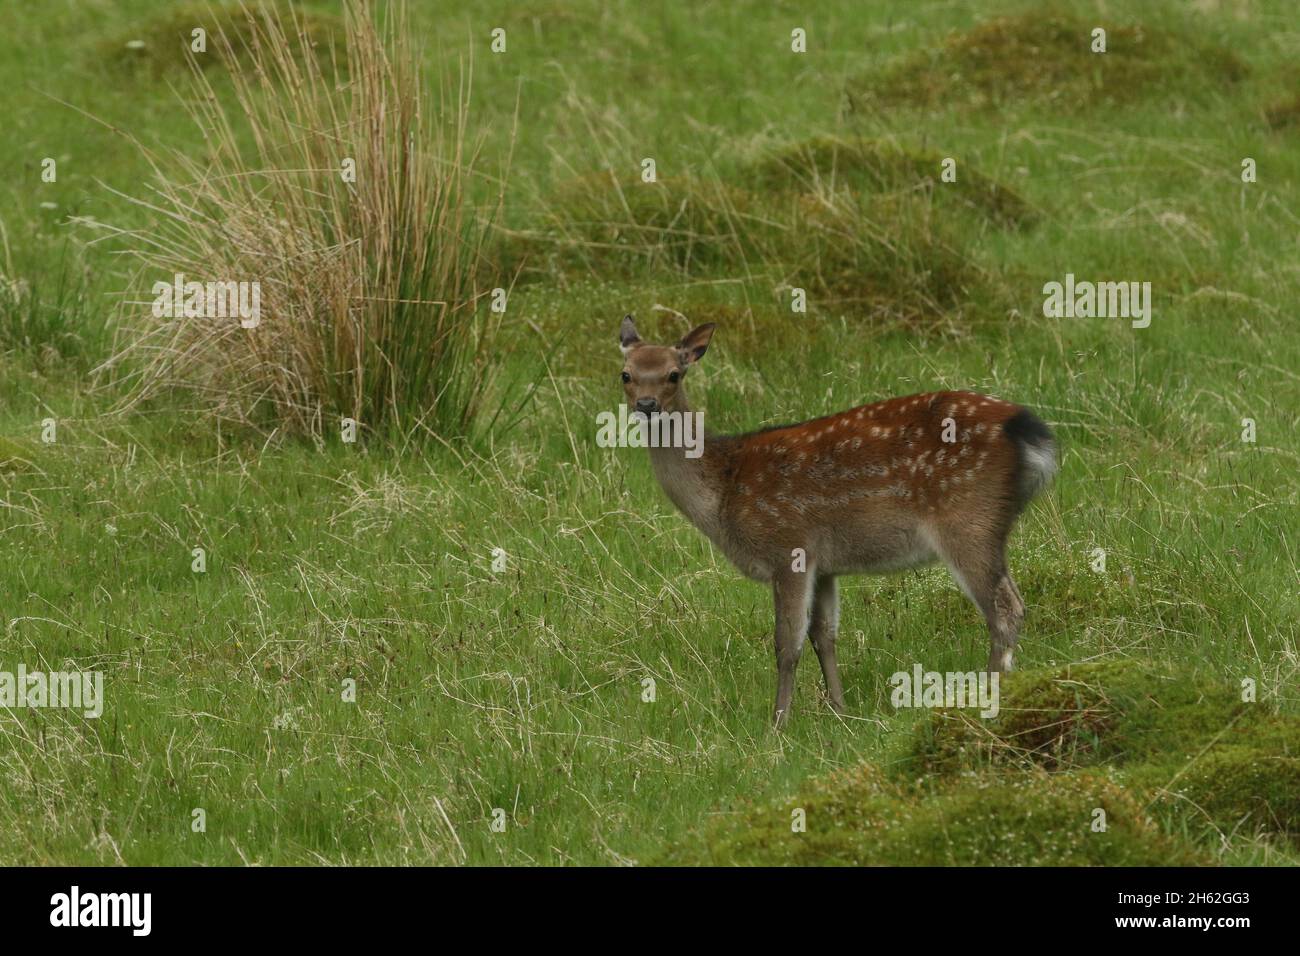 Sika deer doe, image taken in typical habitat of grasses and sedges near to coniferous woodland.  Yellow brown fur with white spots and a small head. Stock Photo